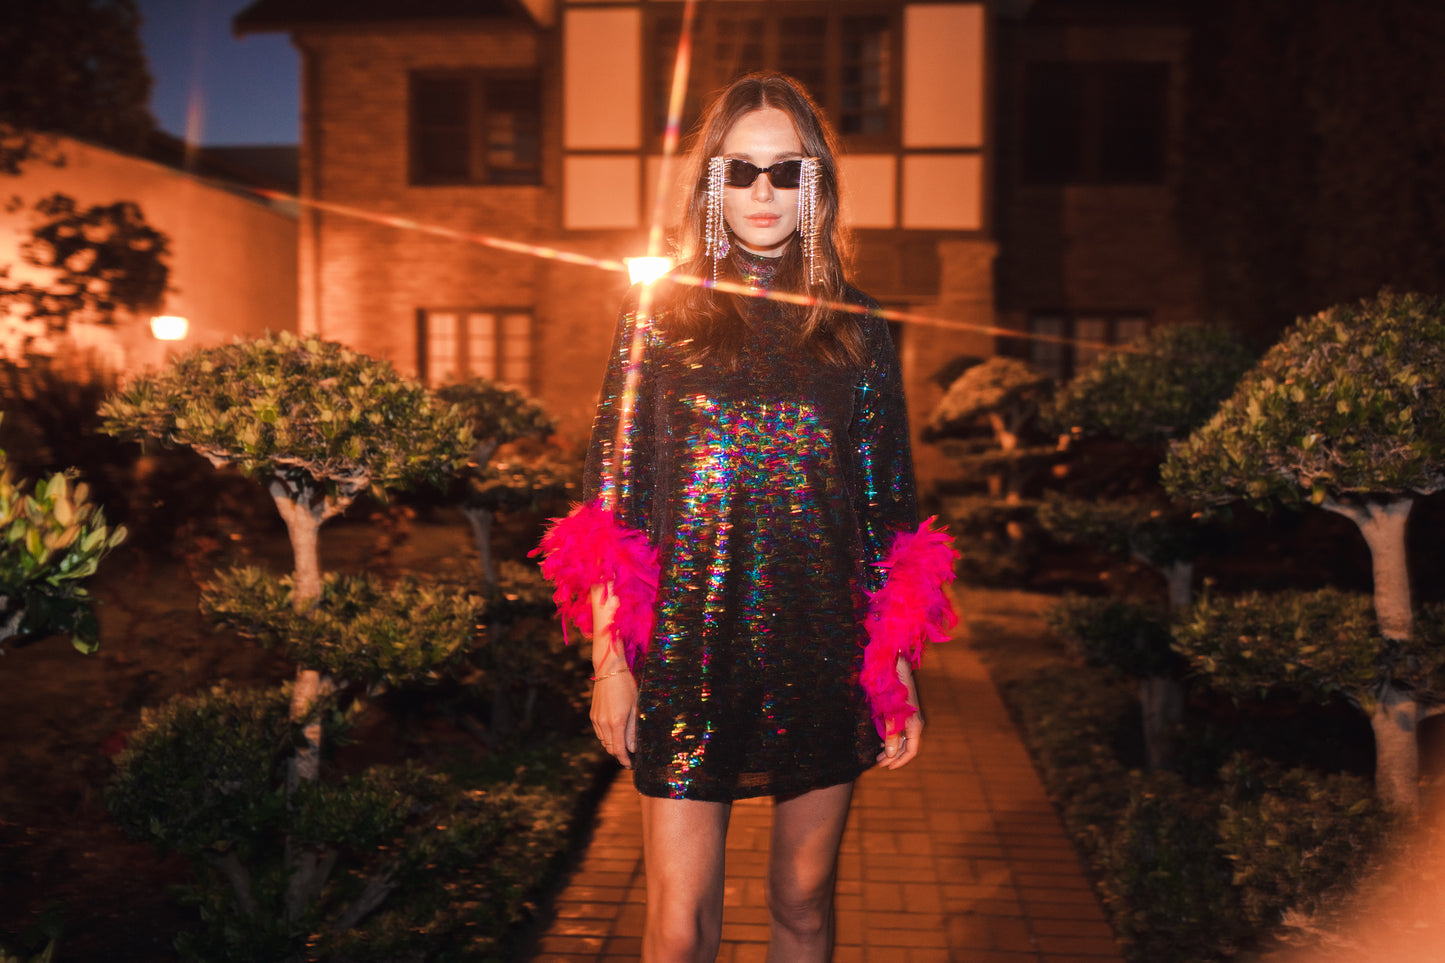 jennafer grace Time Warp Sequin Mini with Pink Feather Cuffs retro 1960s 60s revival mod mini dress with rainbow sequins bell sleeves feathered cuffs boho bohemian hippie romantic whimsical handmade in California USA